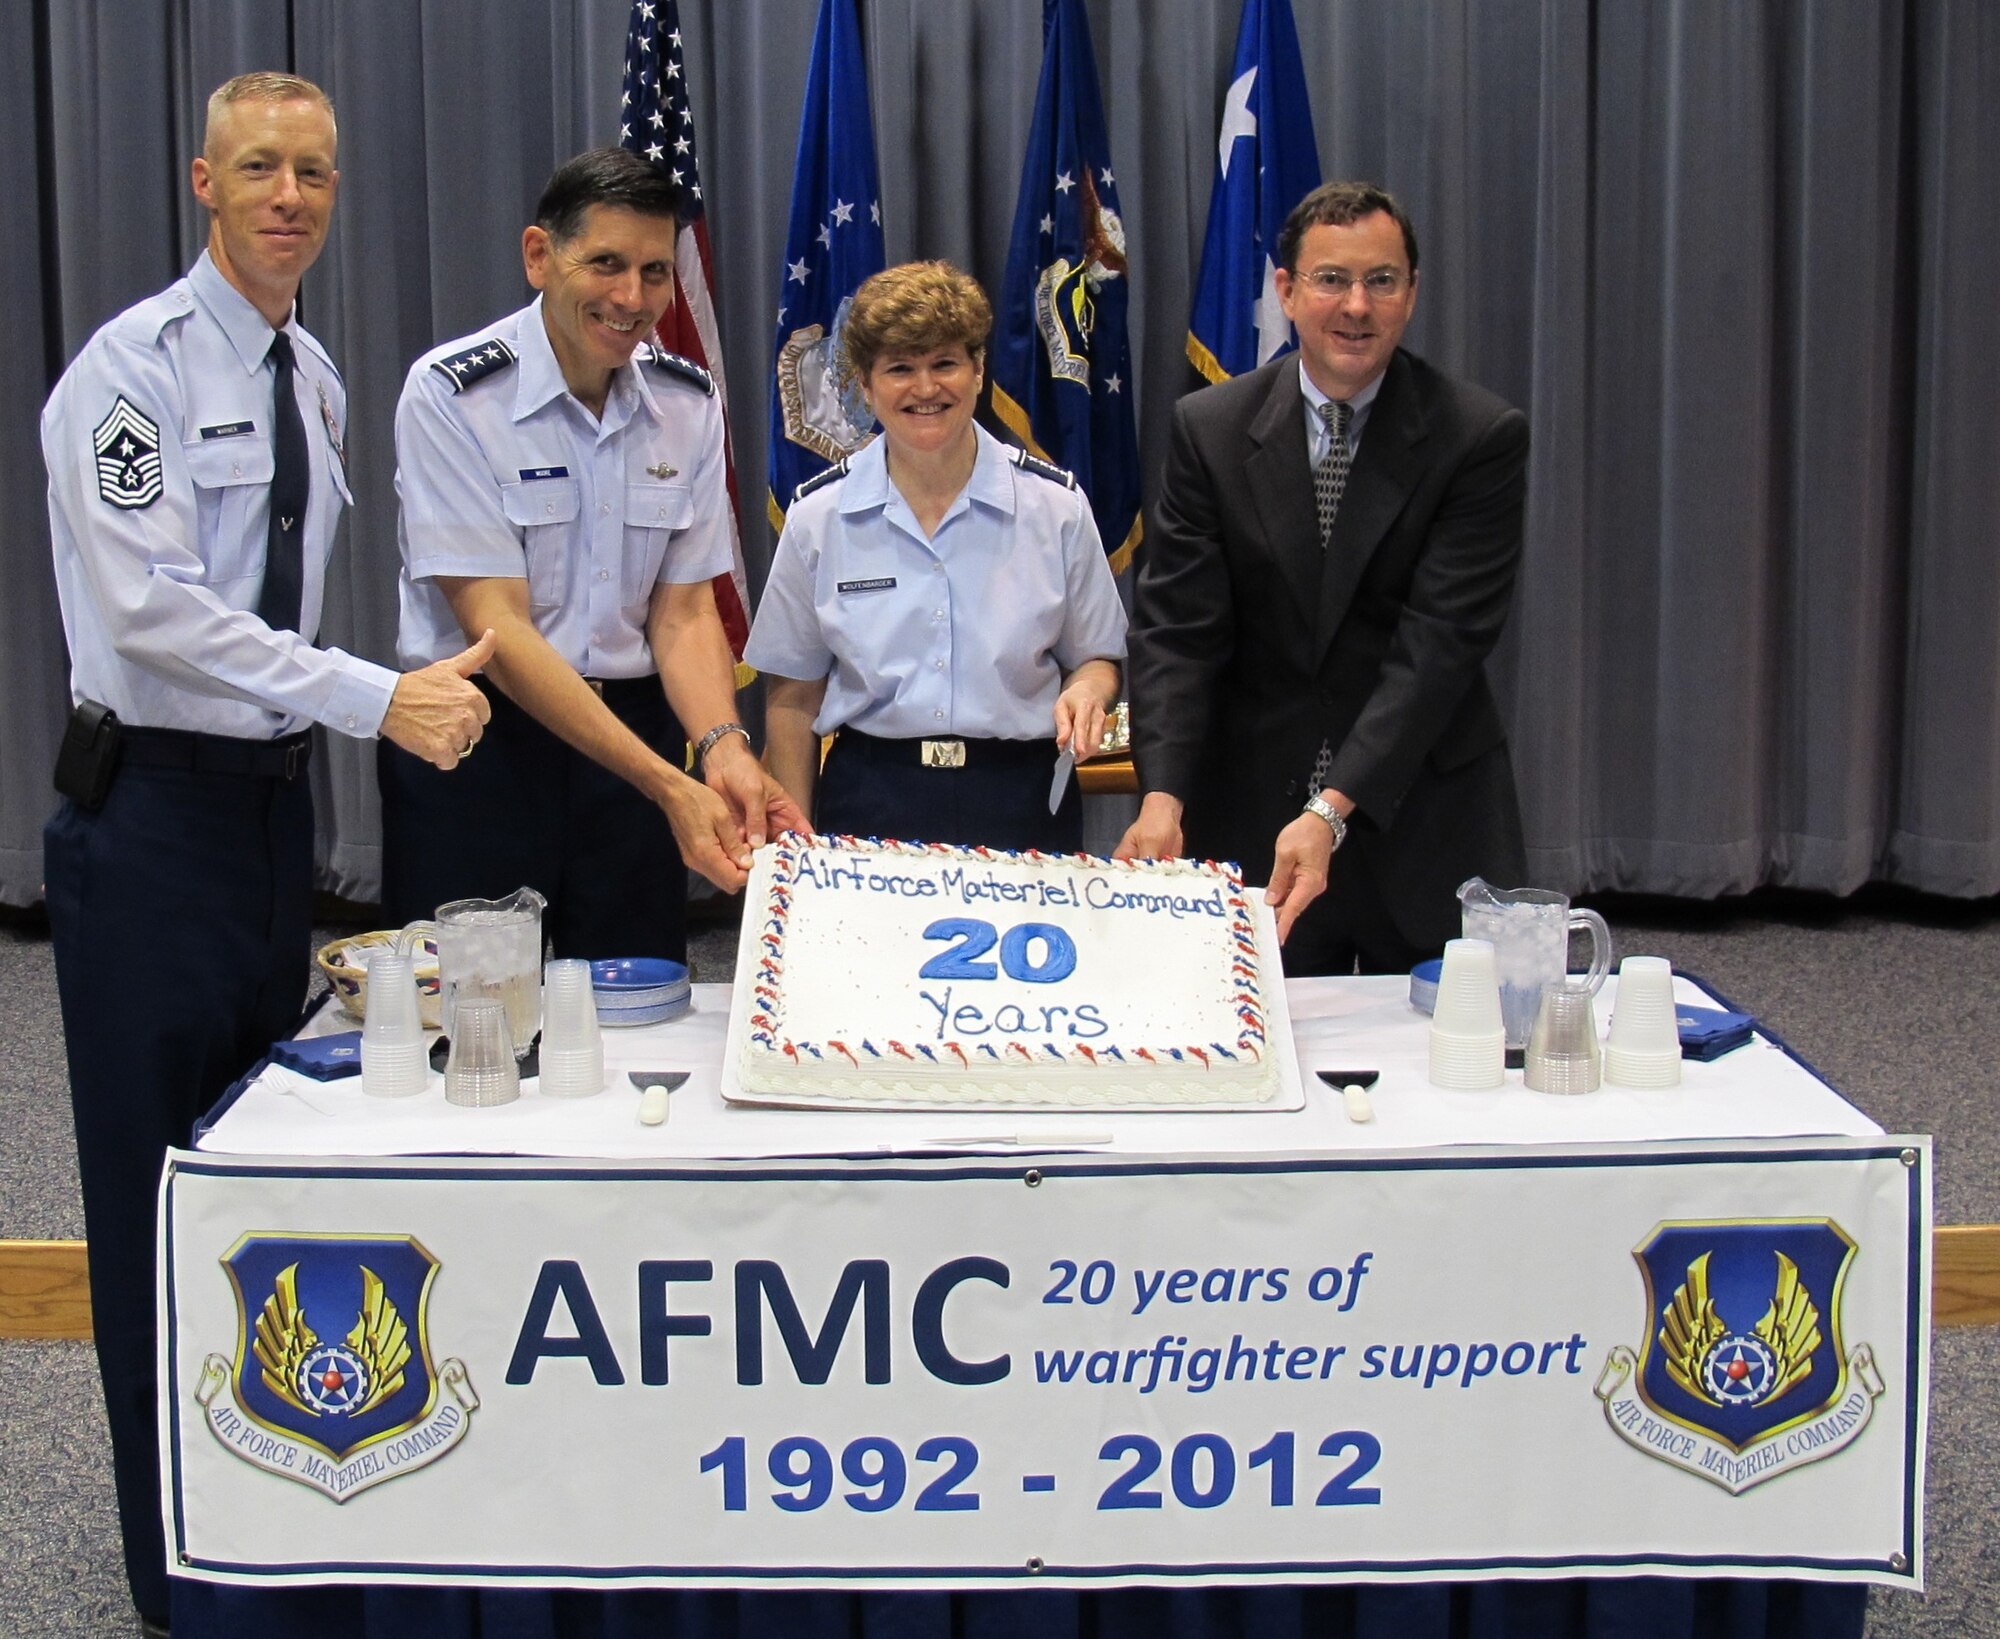 Gen. Janet Wolfenbarger, commander of Air Force Materiel Command, prepares to cut a cake to commemorate the 20th anniversary of AFMC. The brief ceremony marking the occasion took place in Headquarters AFMC July 2, 2012. The command's 20th birthday was July 1. Assisting the general are (from left) Command Chief Master Sgt. Michael Warner, Lt. Gen. C.D. Moore II, AFMC vice commander, and Dr. Steve Butler, AFMC executive director. (U.S. Air Force photo/Ron Fry)
